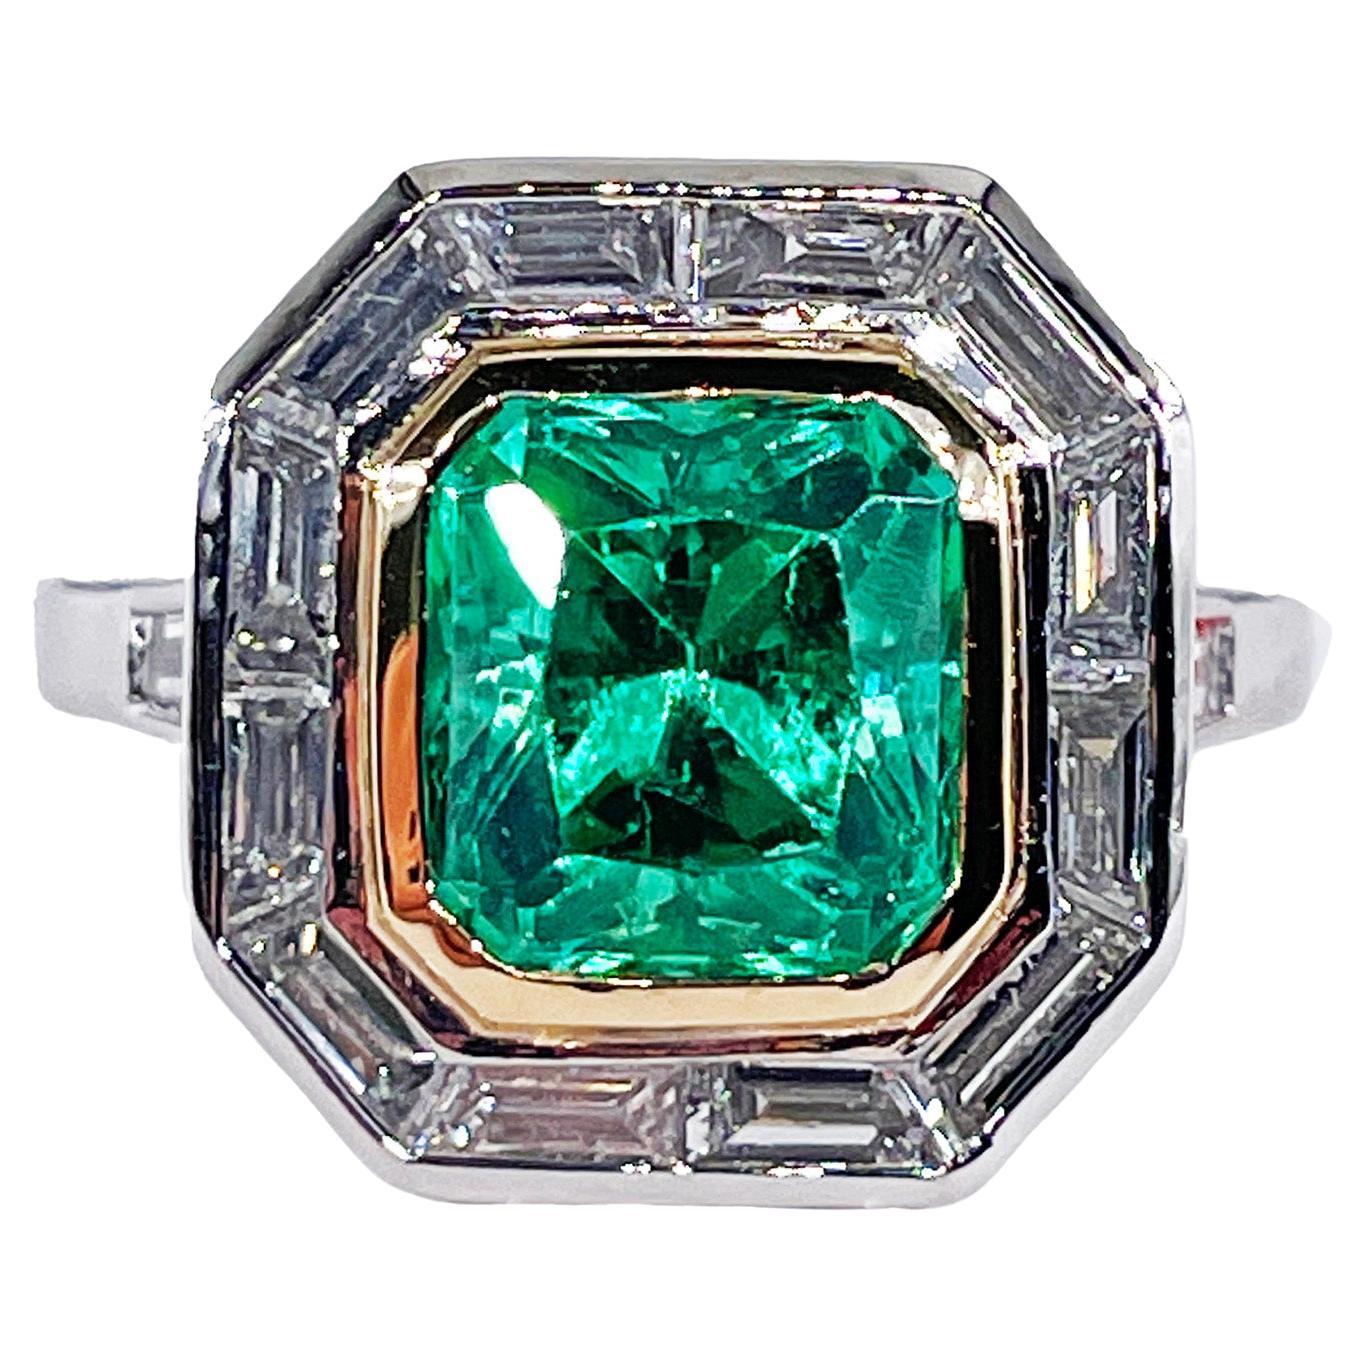  AGL Insignificant VVS 4.66ctw Natural Green Emerald Diamond Platinum 18k Ring For Sale